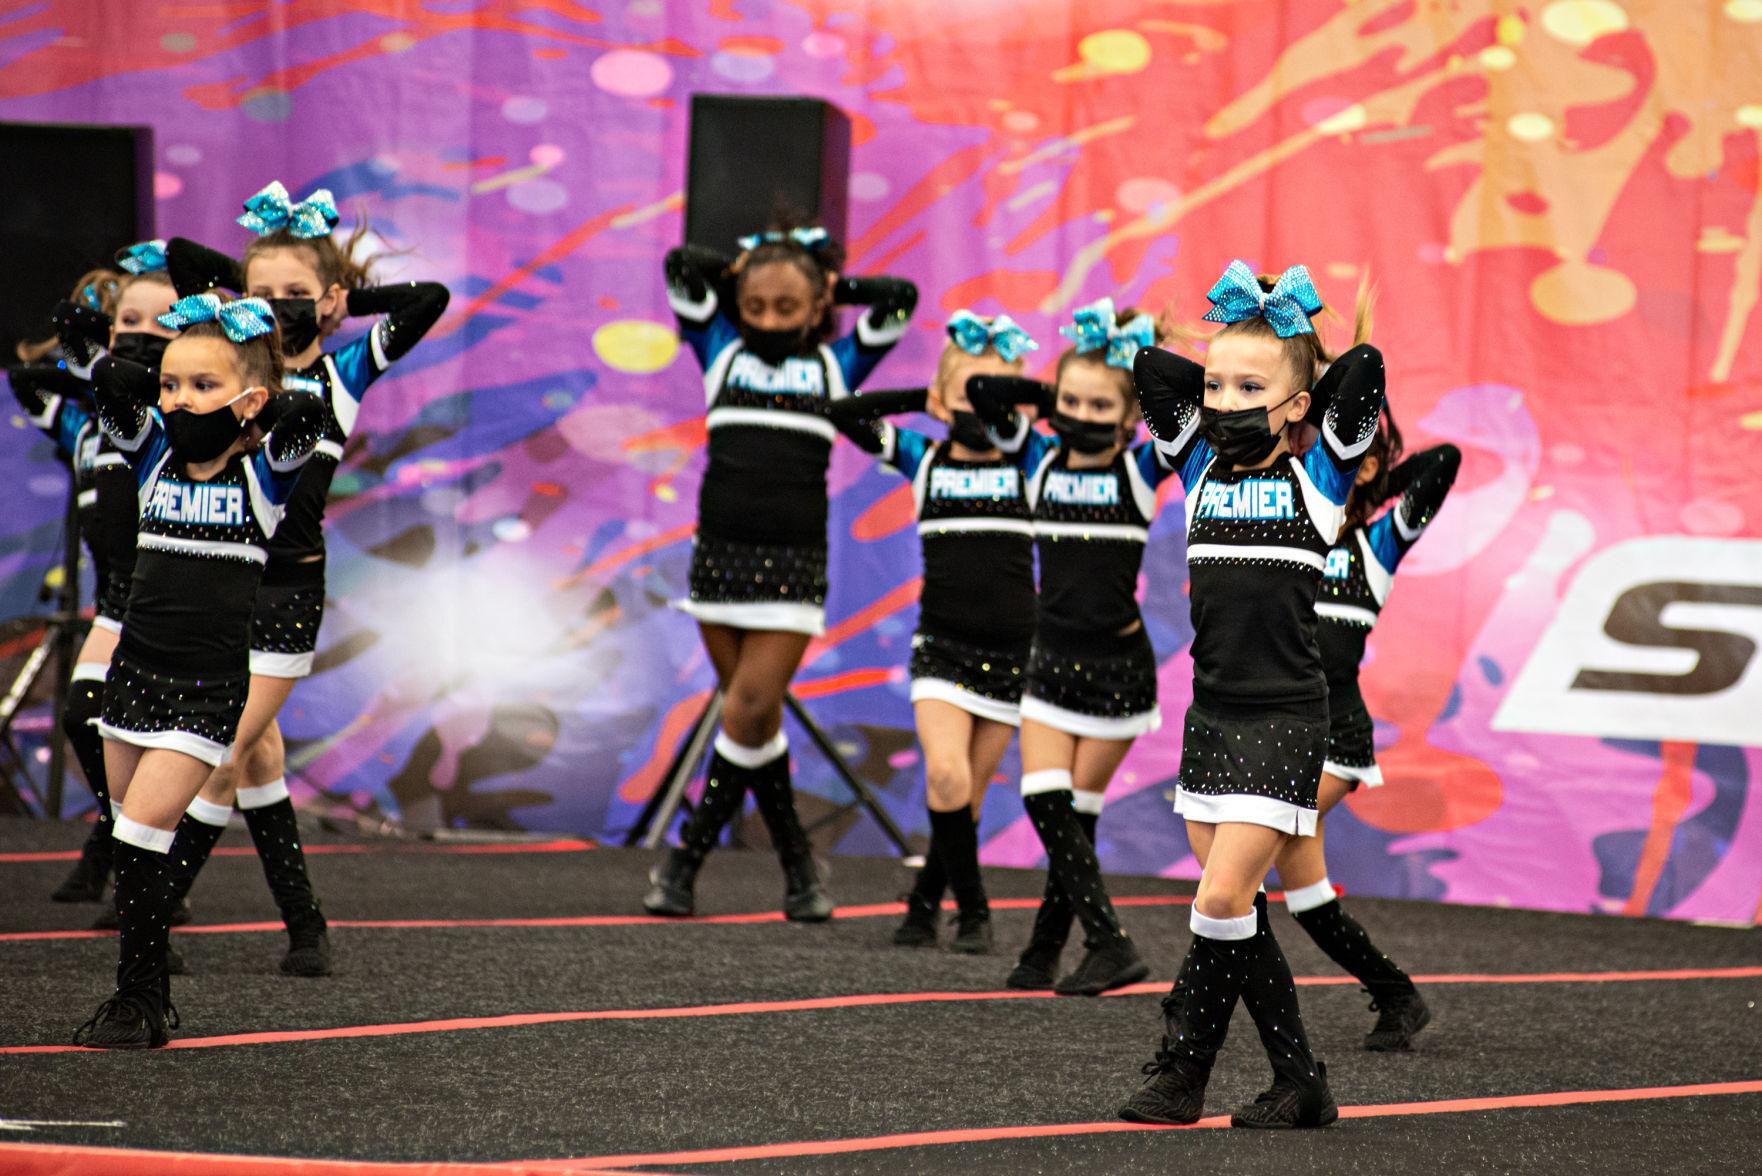 PHOTOS 'Cheer Invasion' Competition in Wildwood